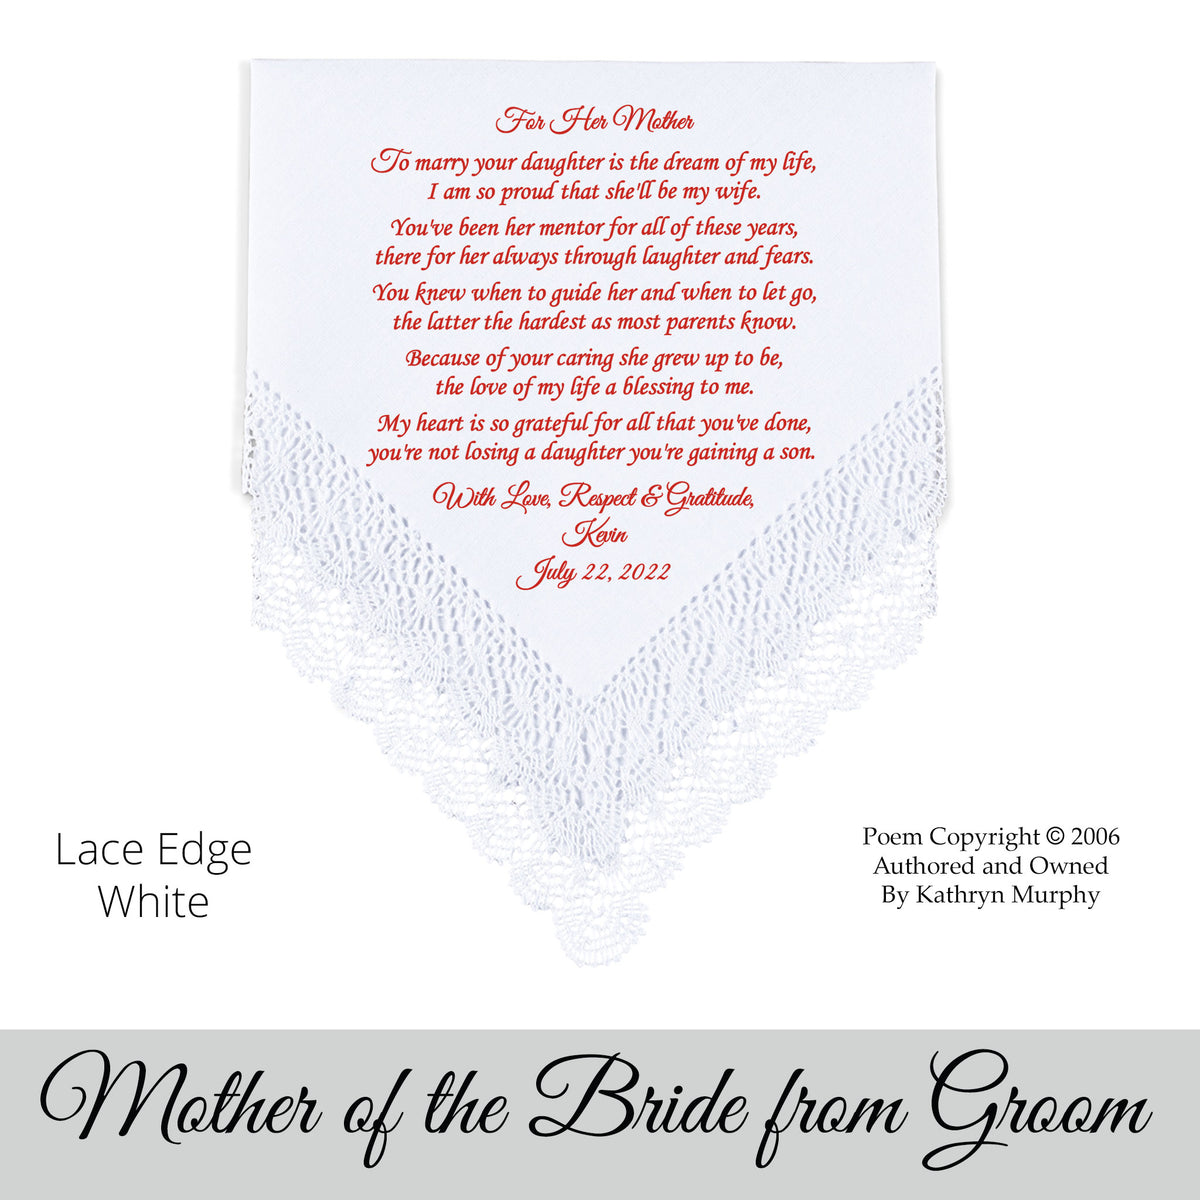 gift for the mother of the bride. Wedding Hankie with printed poem from the groom